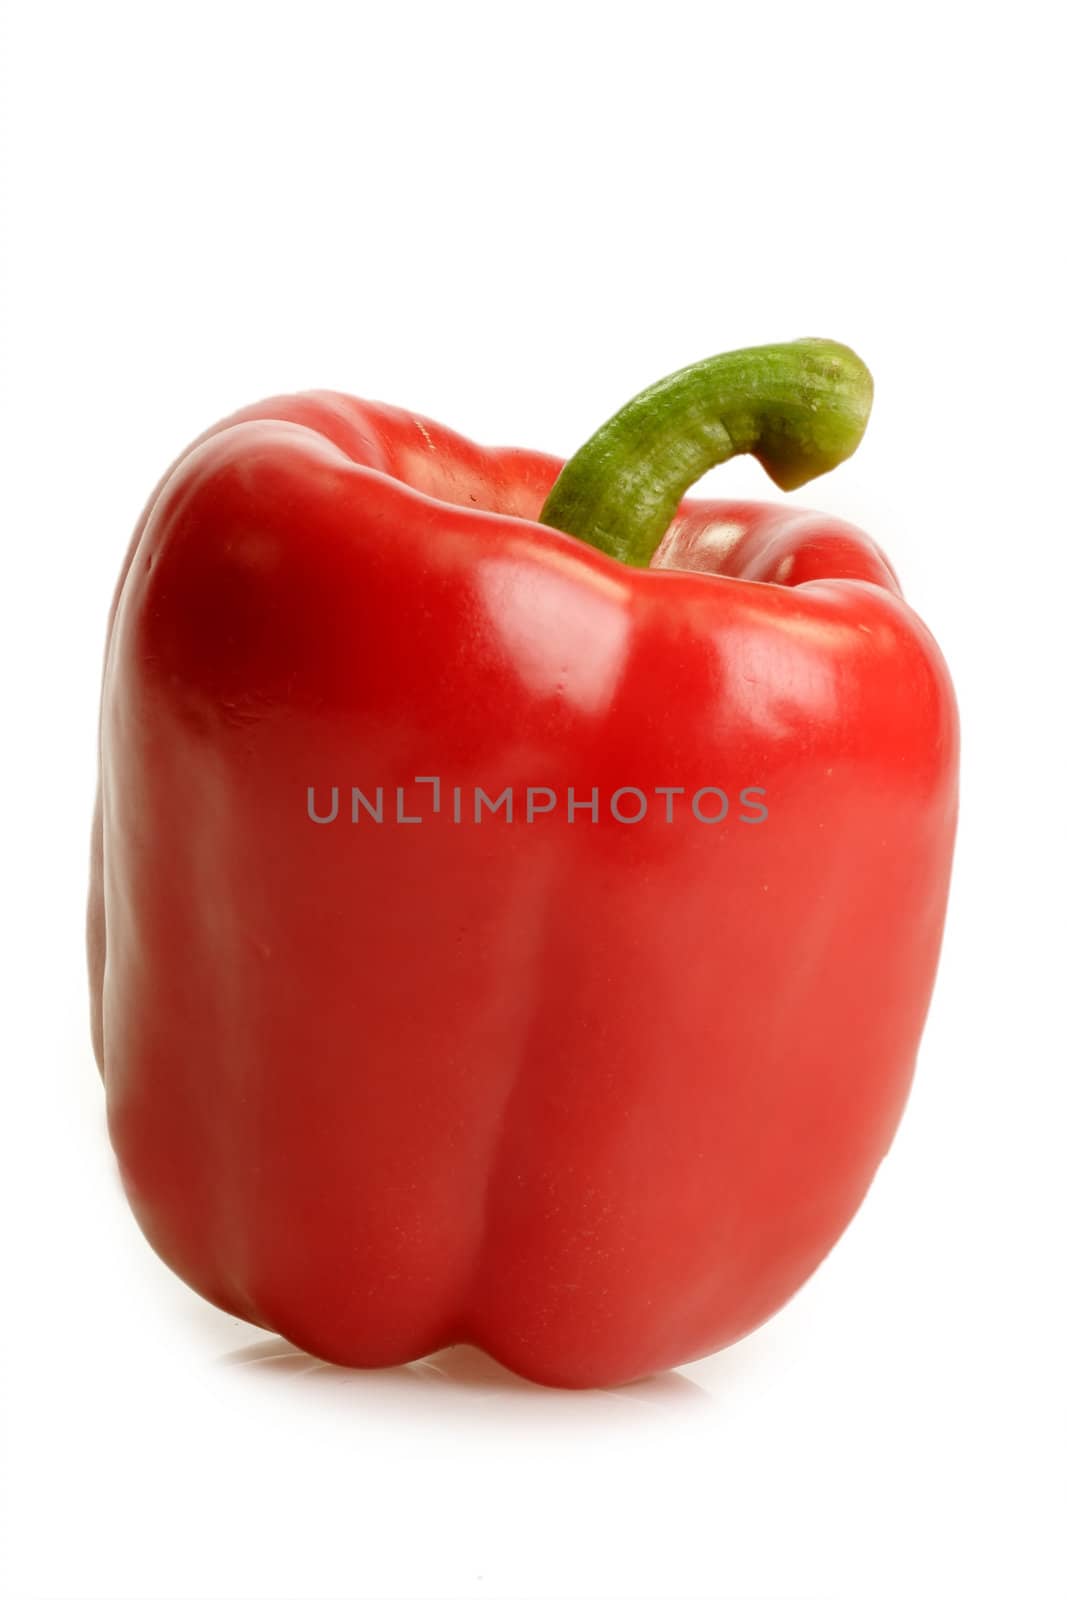 Red bell pepper on bright background